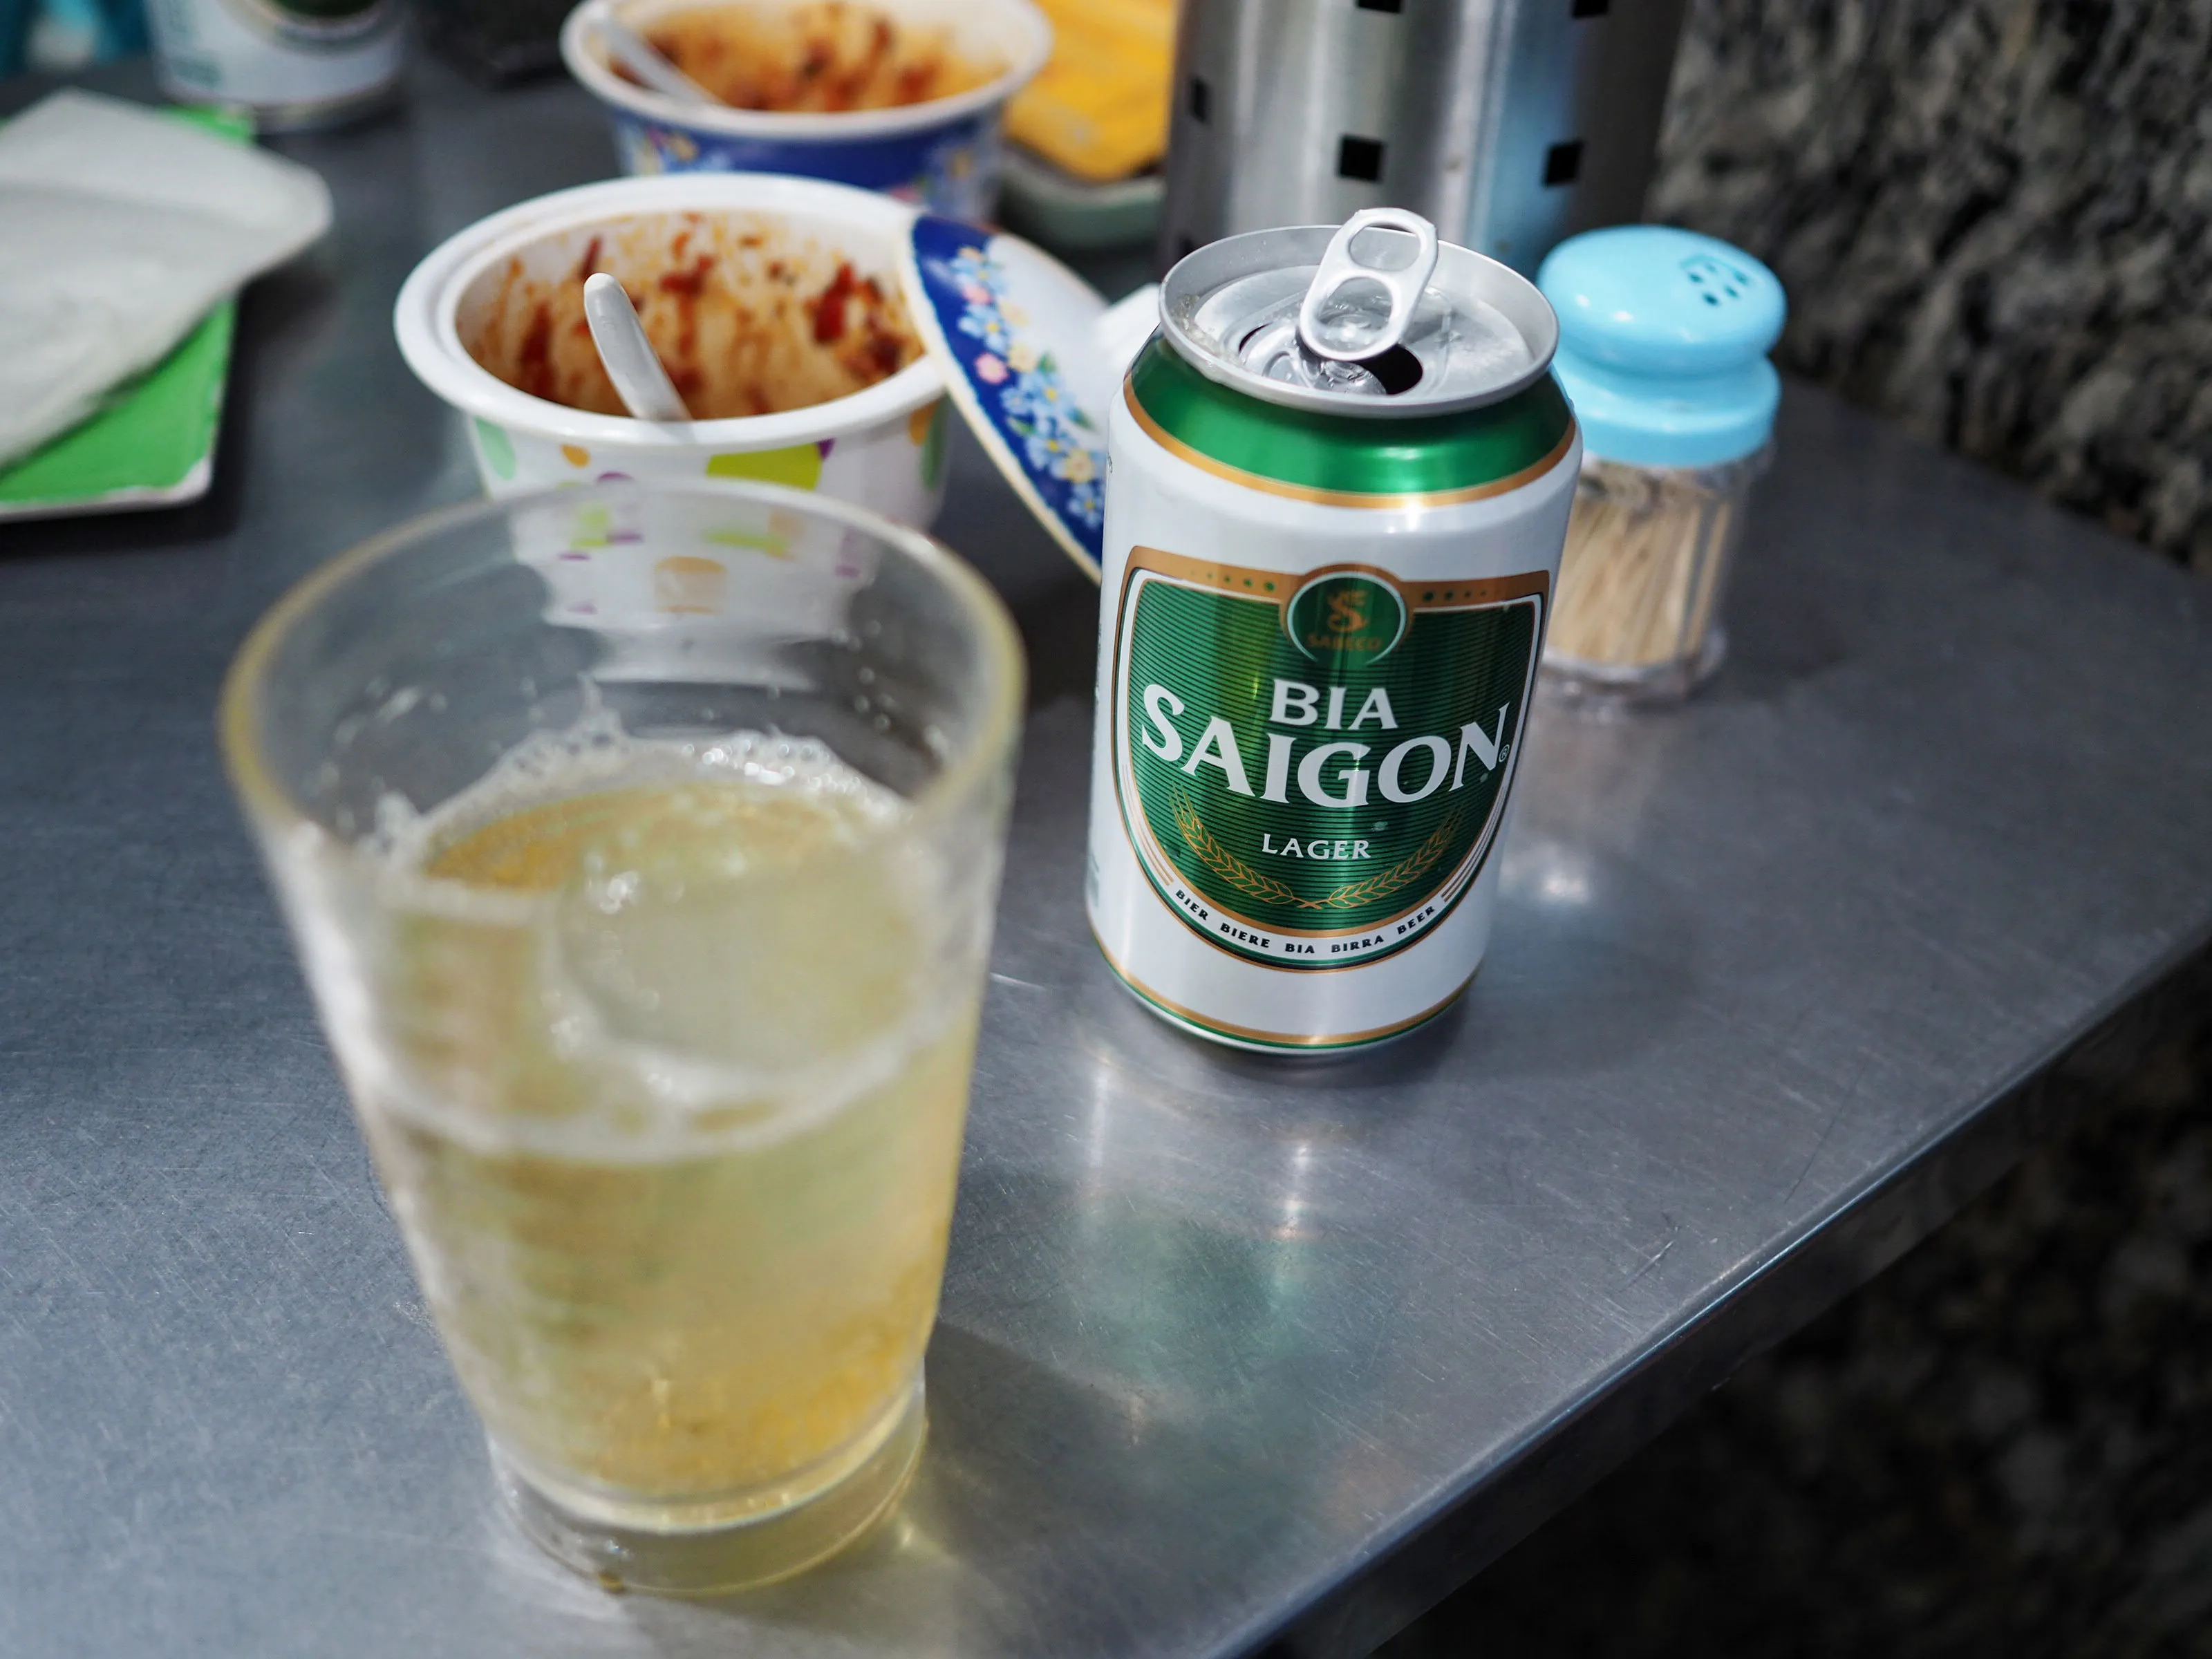 Saigon beer is very light. It does not have much taste, but it can be very refreshing.